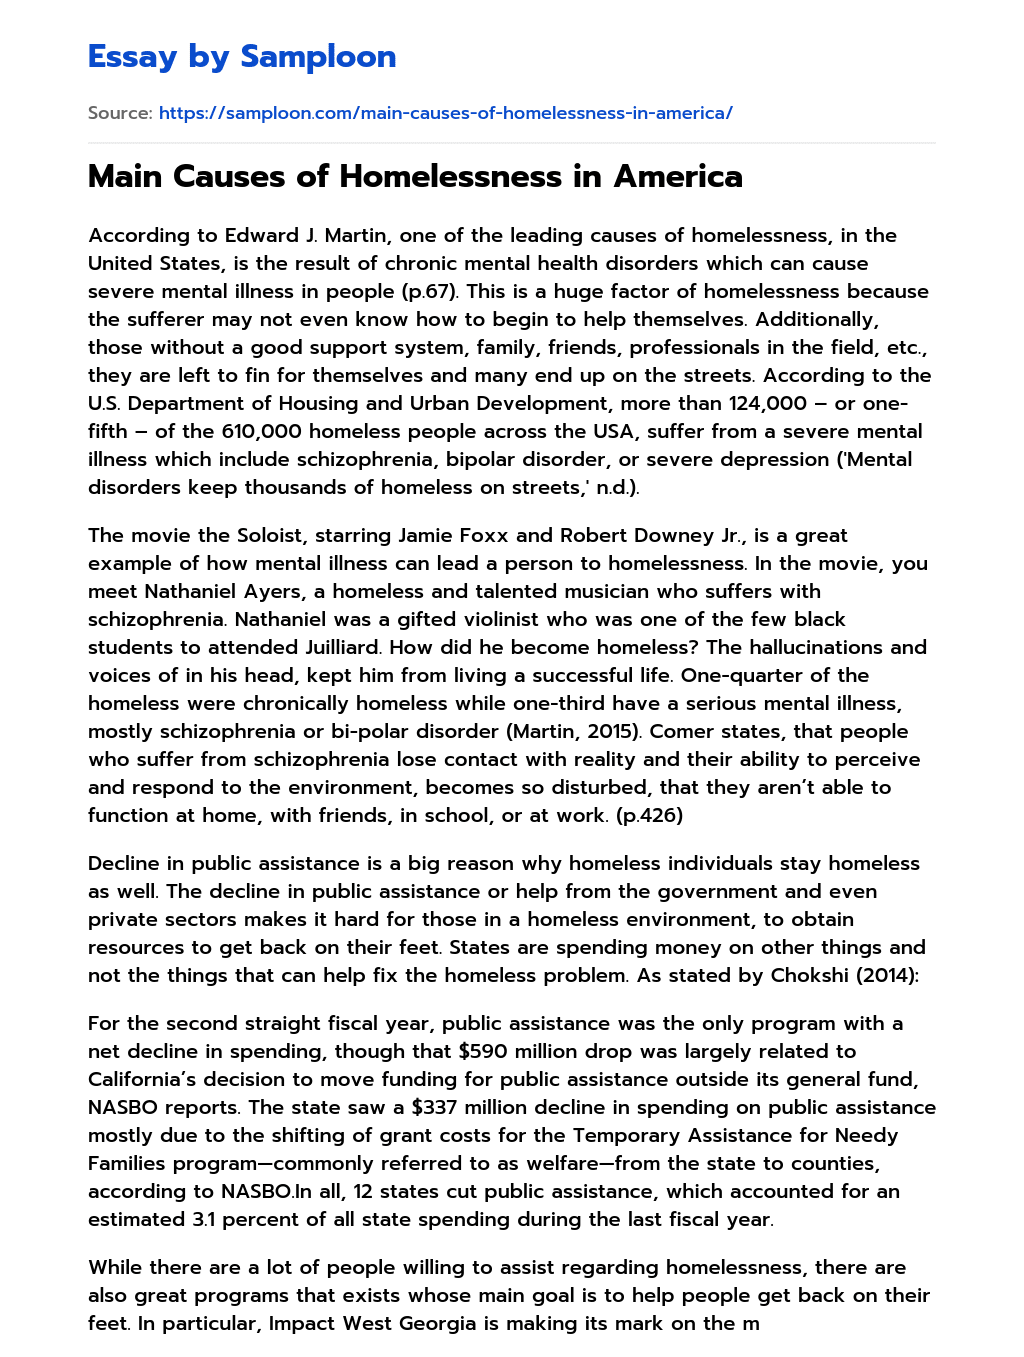 Main Causes of Homelessness in America essay